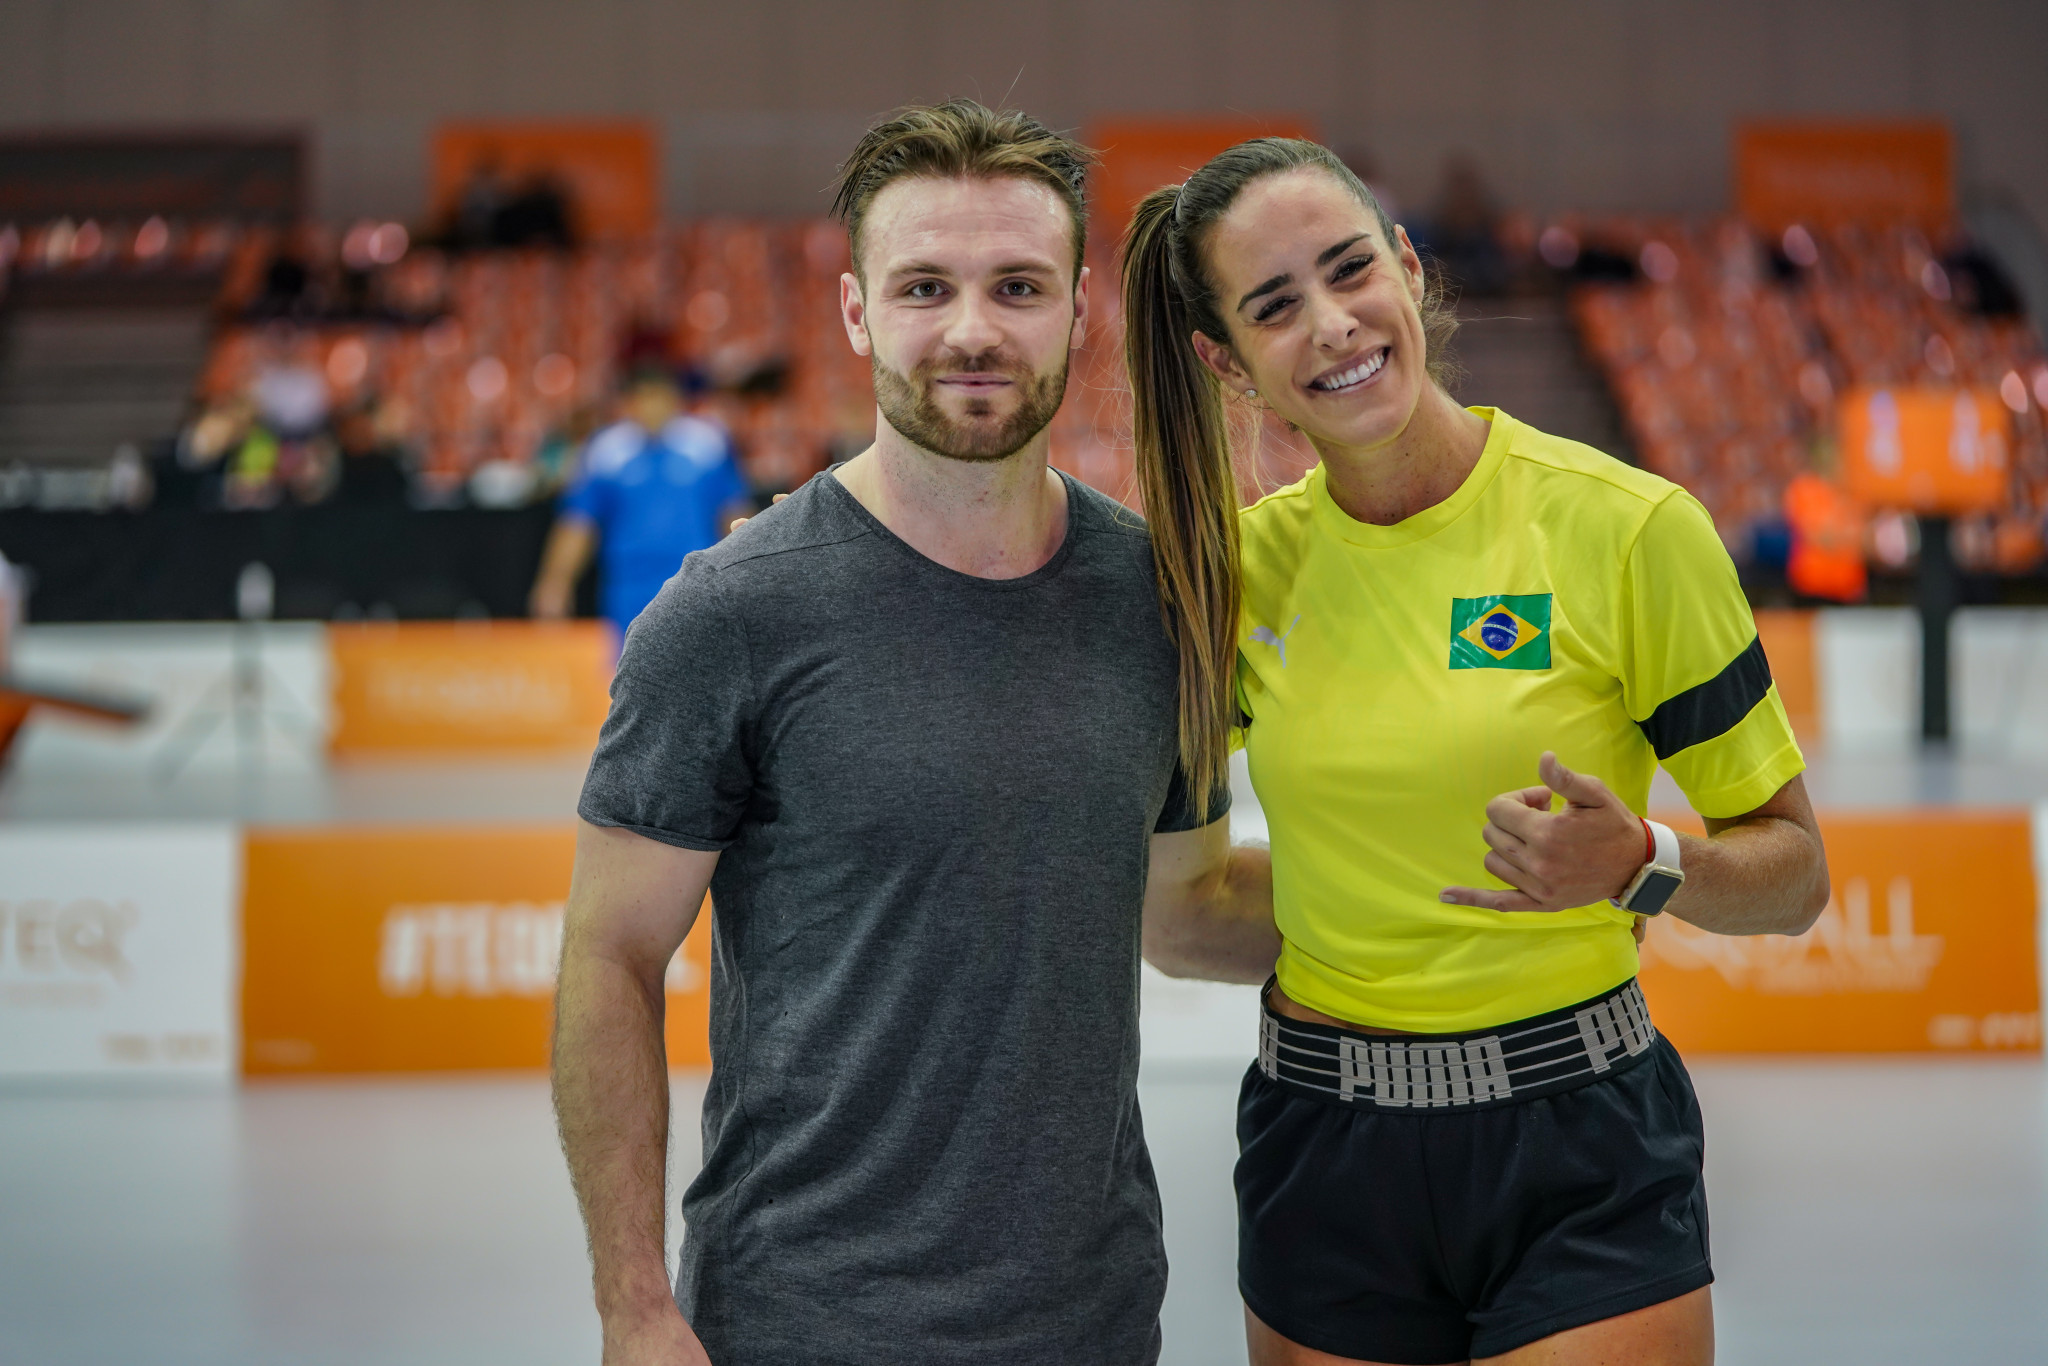 Teqball player Natalia Guitler revealed her hopes for a women's singles and doubles category ©FITEQ